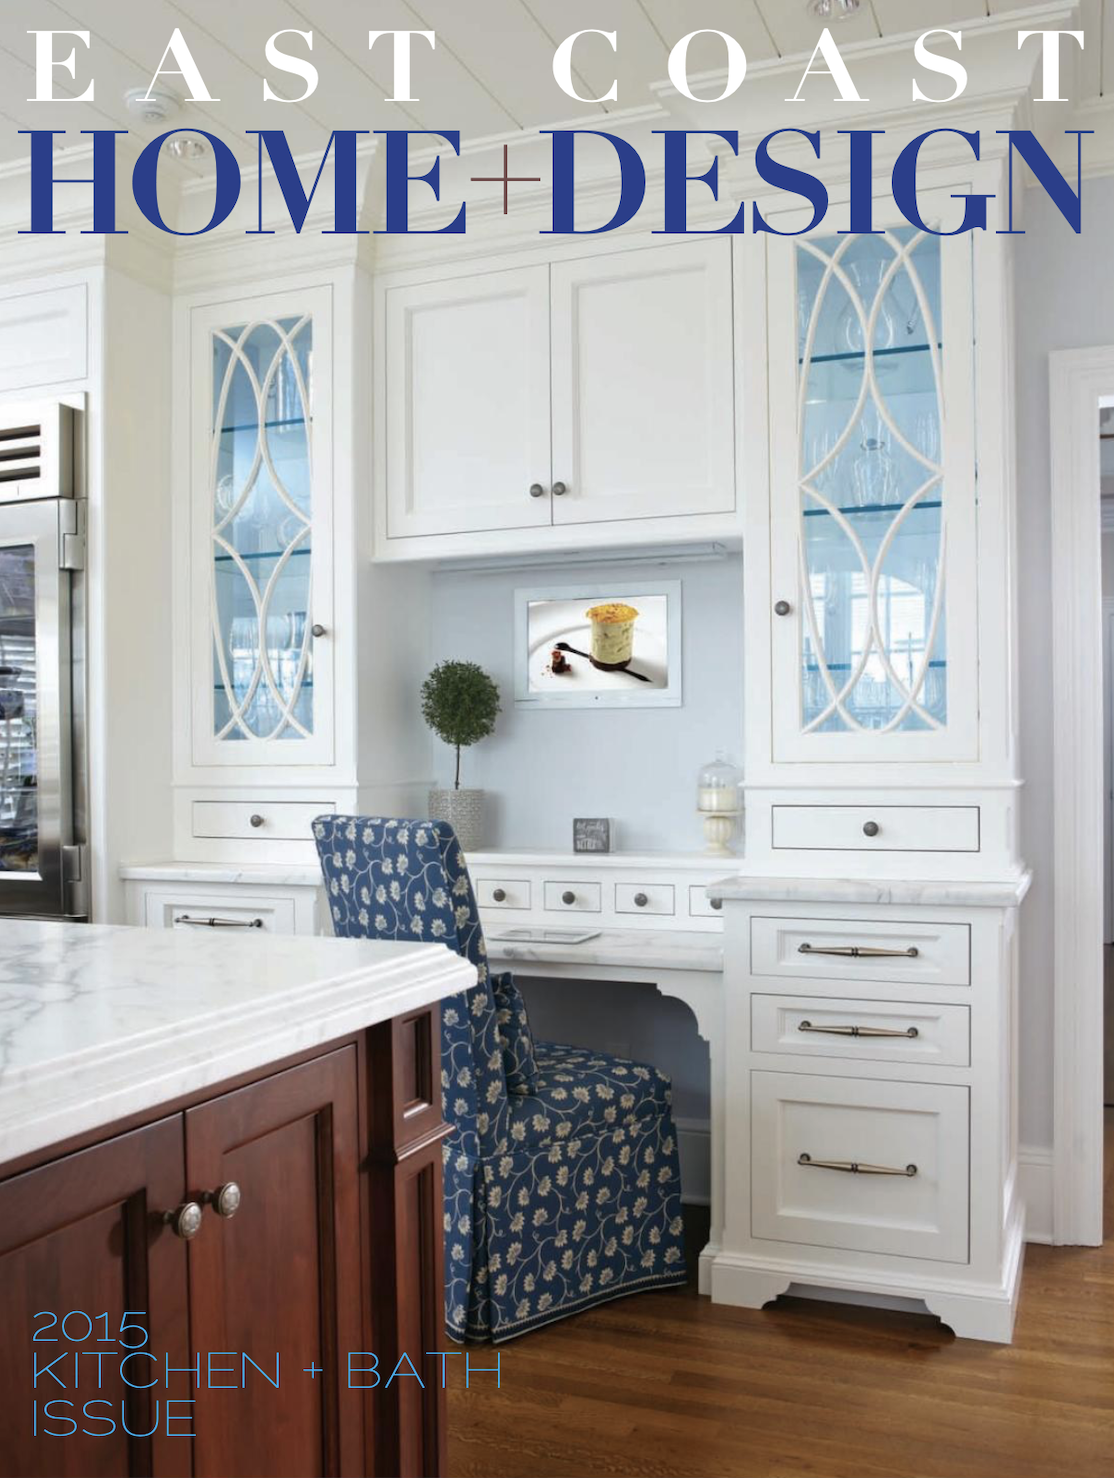 East Coast Home+Design 2015 Kitchen+Bath Issue Featuring Lara Michelle Interiors Inc. Westchester NY and Greenwich CT